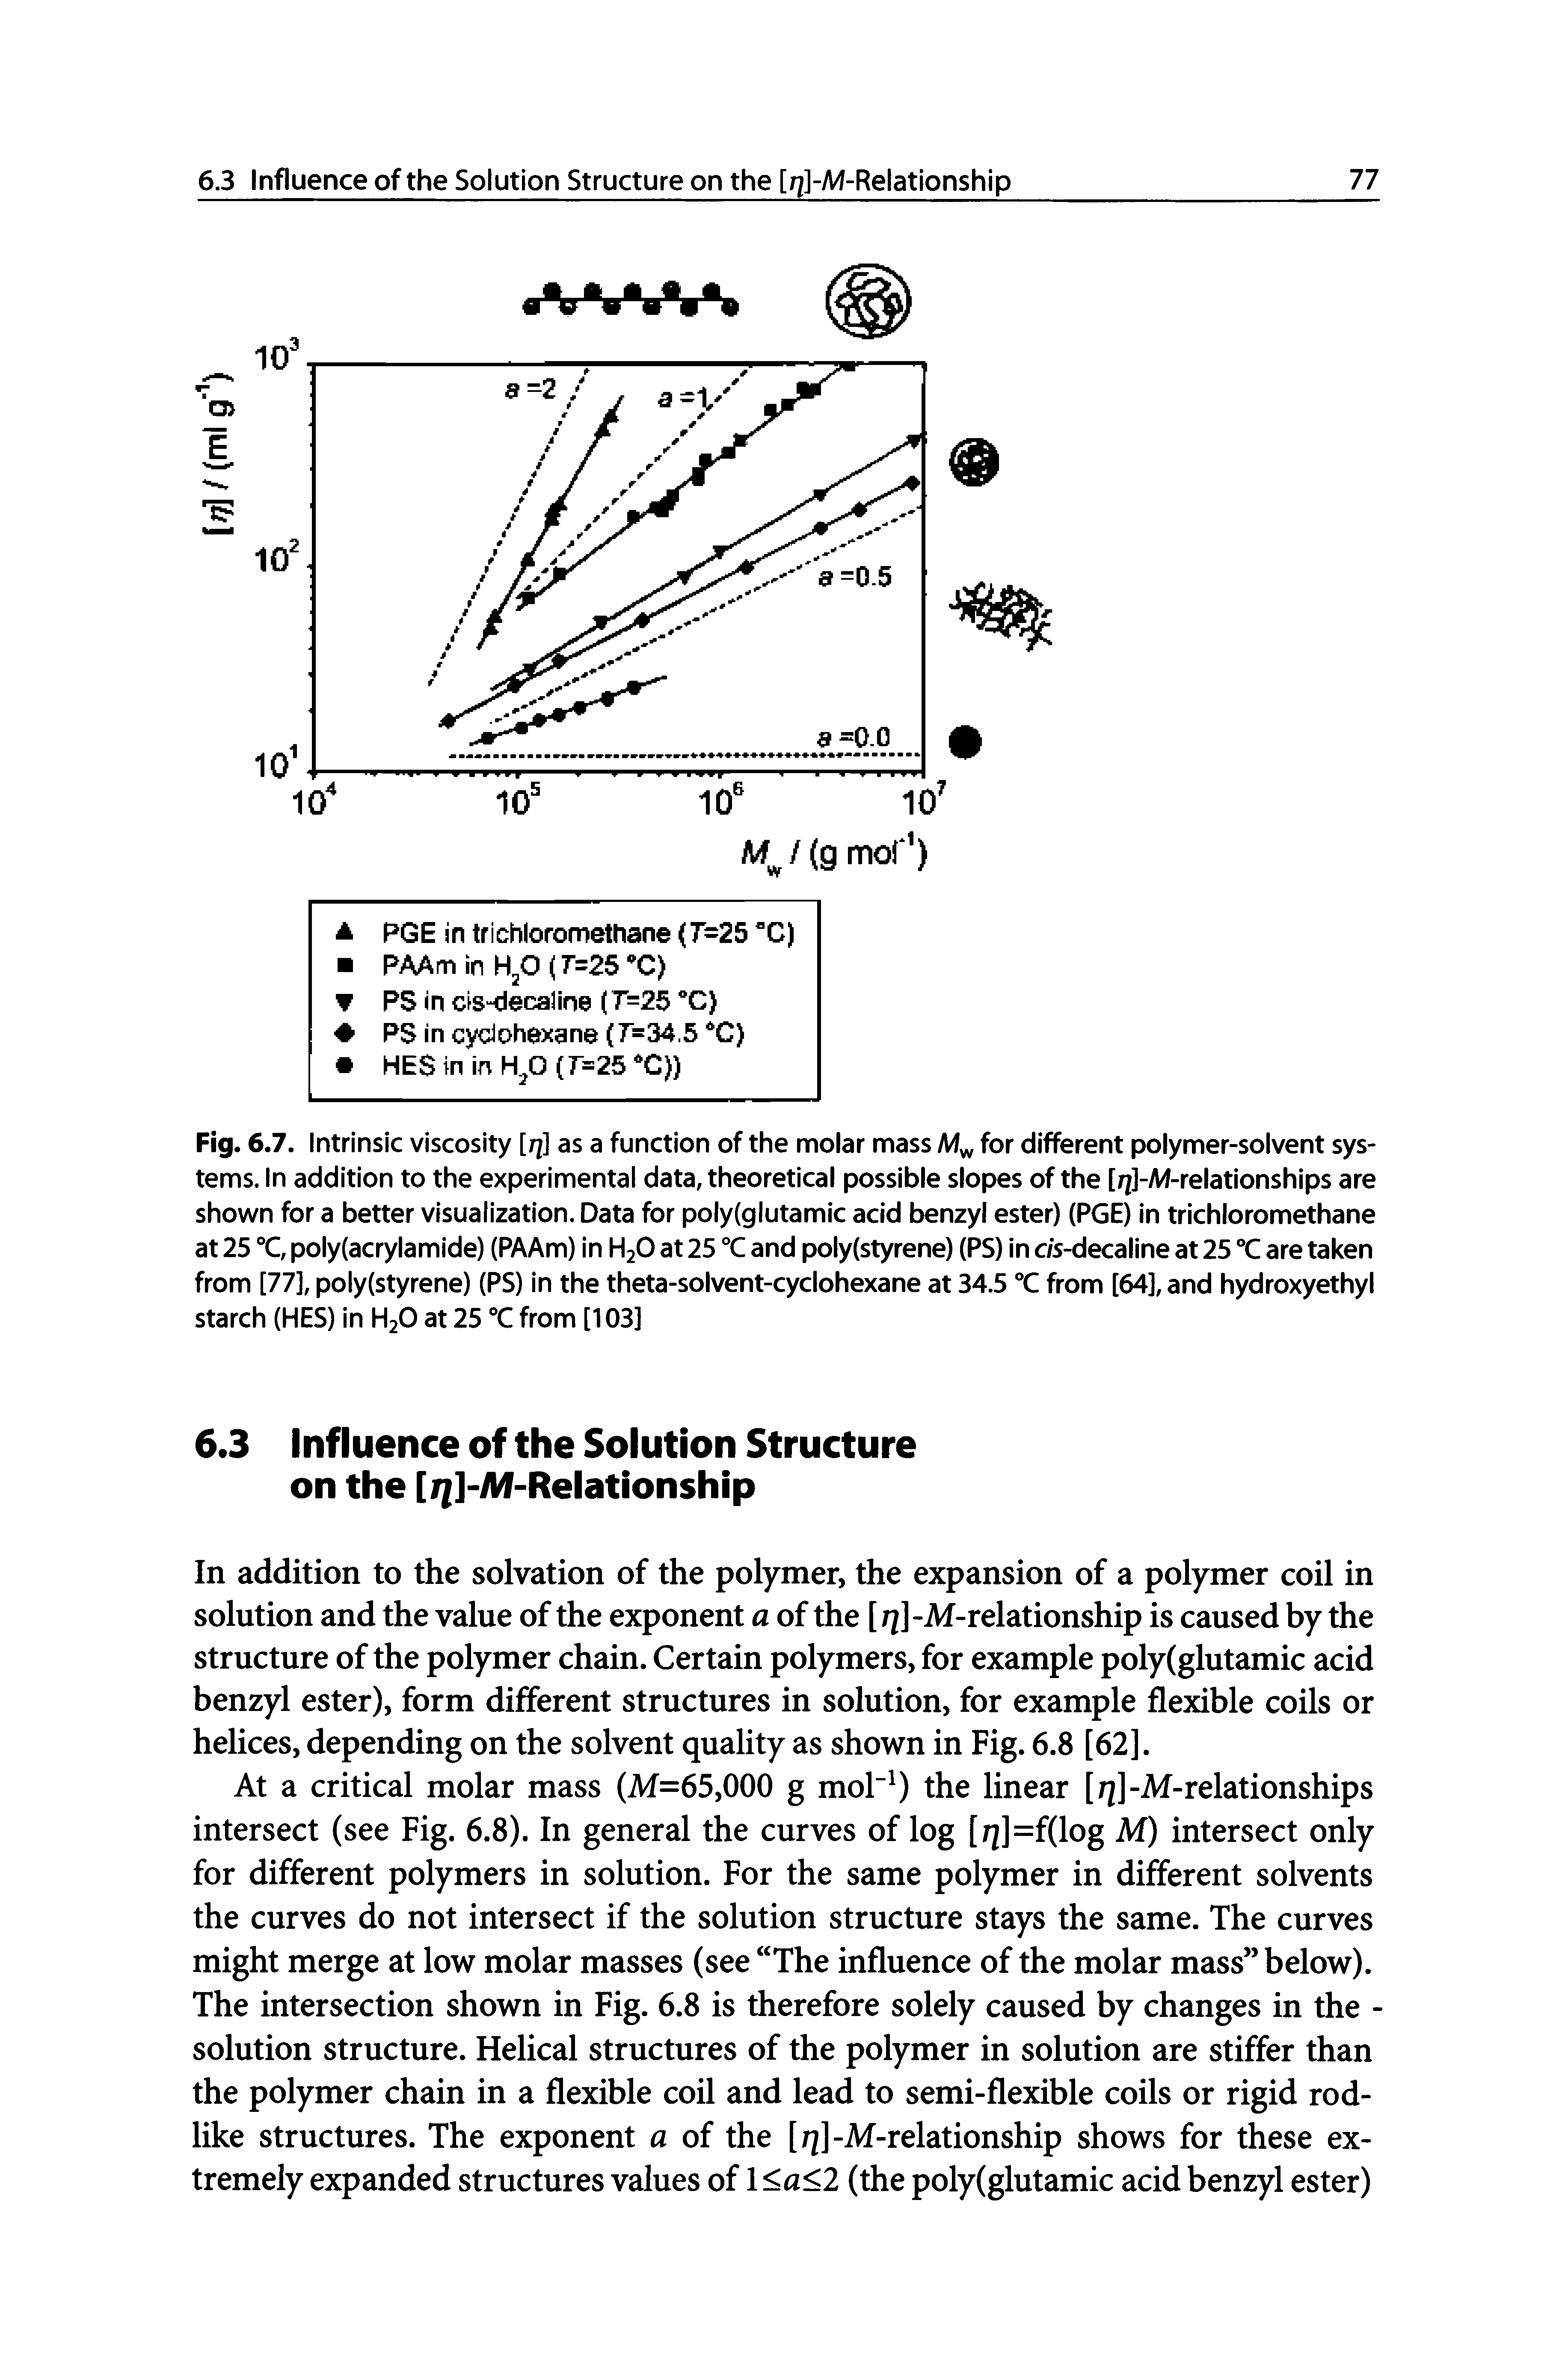 Fig. 6.7. Intrinsic viscosity [q] as a function of the molar mass for different polymer-solvent systems. In addition to the experimental data, theoretical possible slopes of the [rj]-/M-relationships are shown for a better visualization. Data for poly(glutamic acid benzyl ester) (PGE) in trichloromethane at 25 C, poly(acrylamide) (PAAm) in H2O at 25 and poly(styrene) (PS) in c/s-decaline at 25 °C are taken from [77], poly(styrene) (PS) in the theta-solvent-cyclohexane at 34.5 X from [64], and hydroxyethyl starch (HES) in H2O at 25 C from [103]...